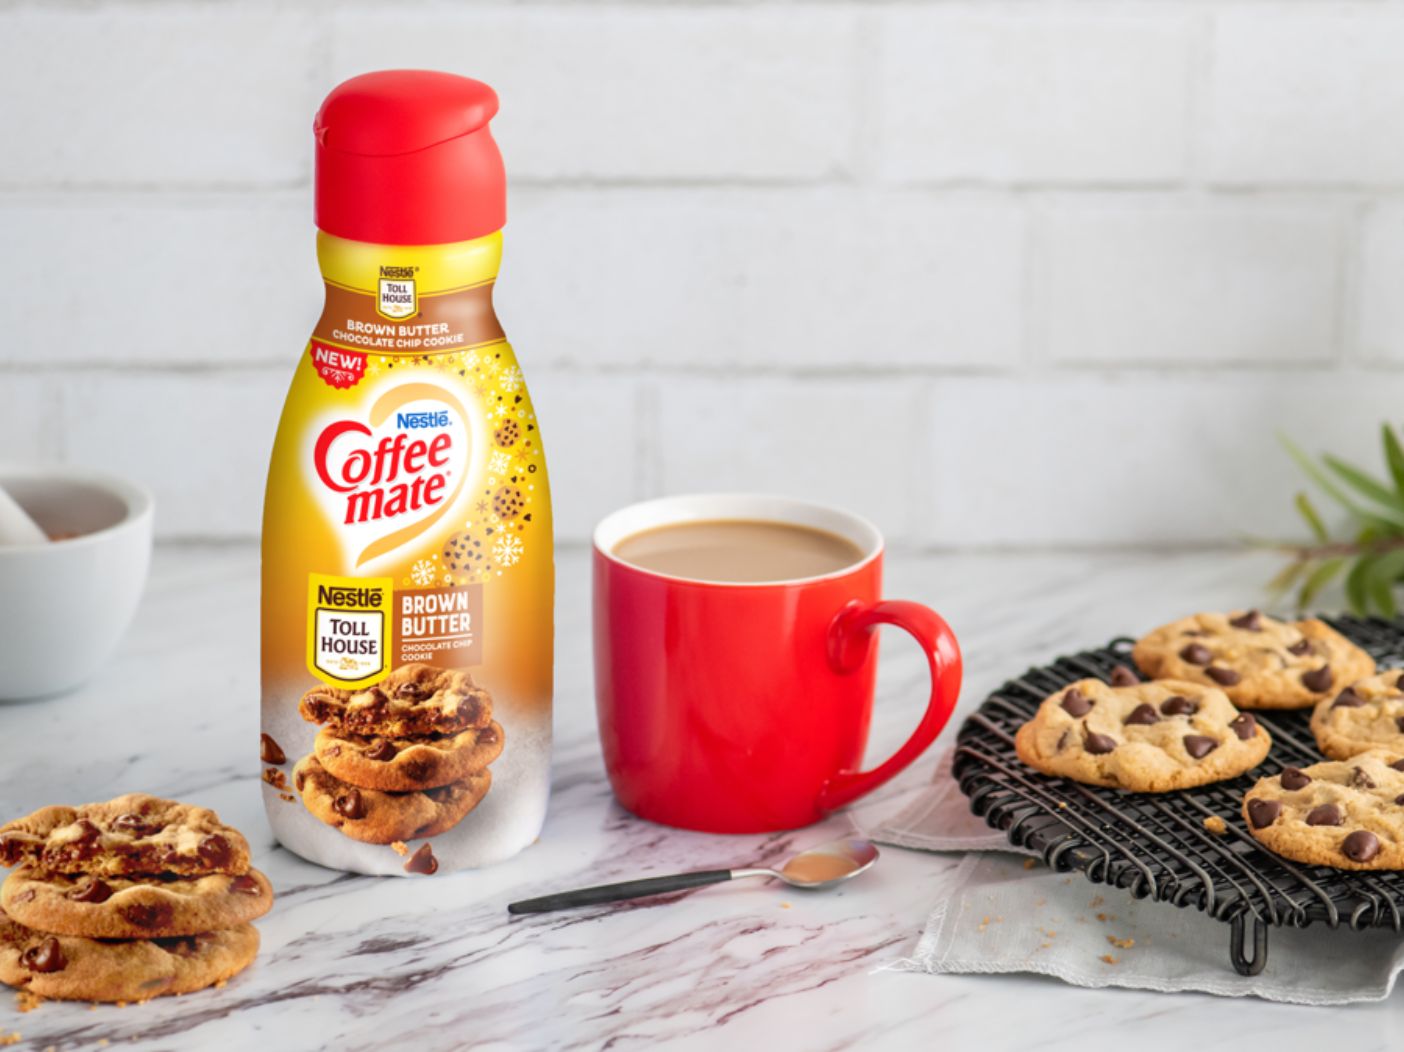 I Tried Nestlé’s New Brown Butter Chocolate Chip Cookie Creamer, And It’s Worth Its Weight In Gold